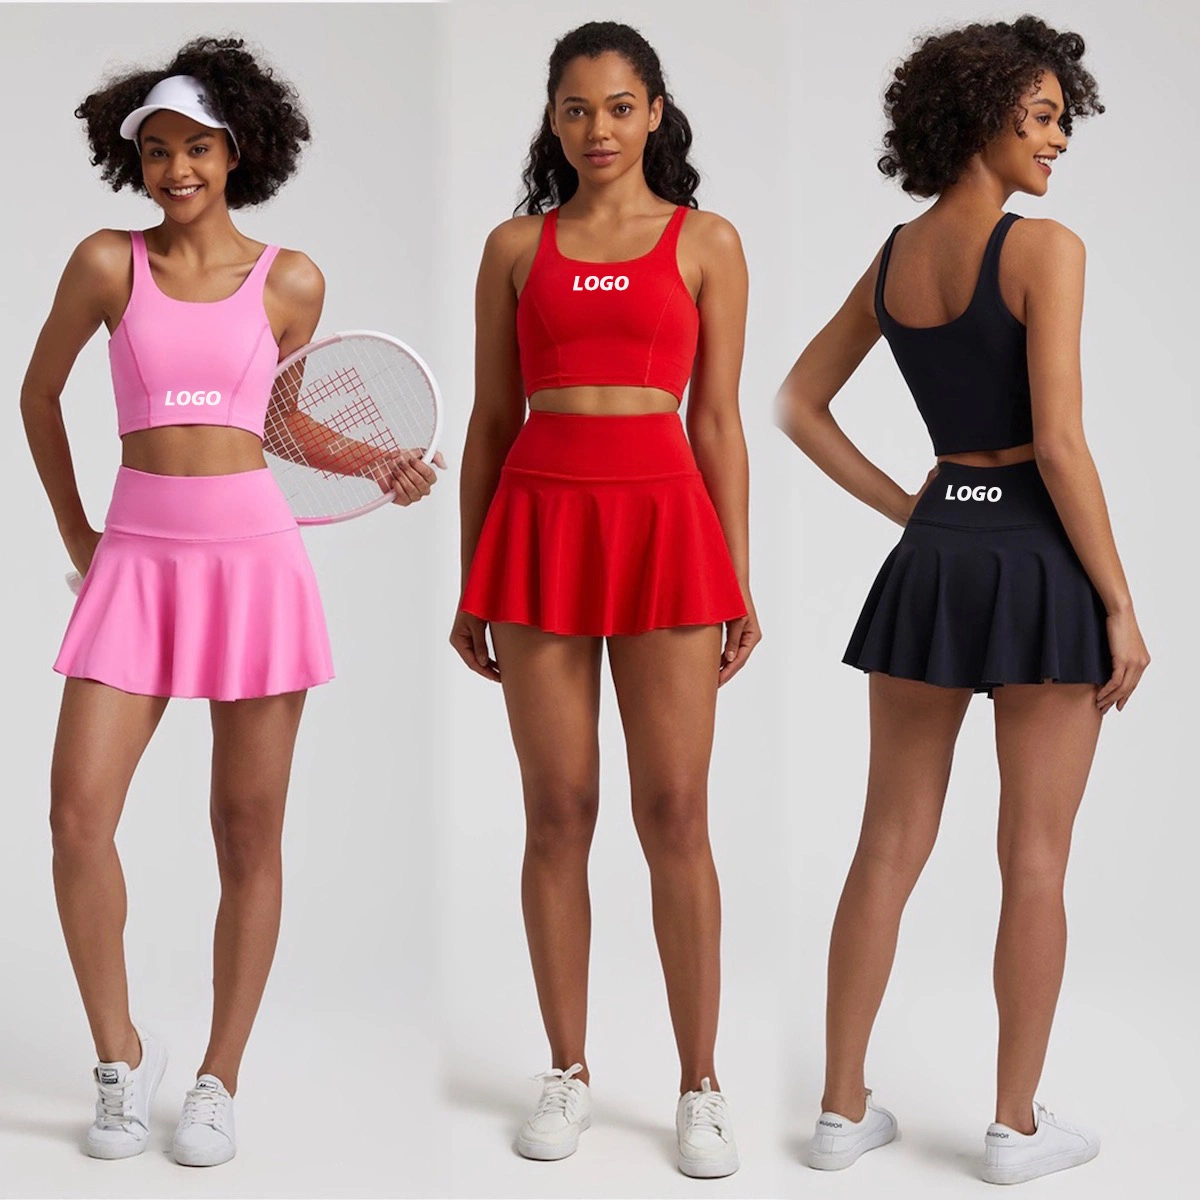 Wholesale Womens New Premium Full Motion Summer Activewear Apparel, 2PCS Casual Tank Top + Tennis Skirts with Shorts and Pocket Sports Jogger Suit